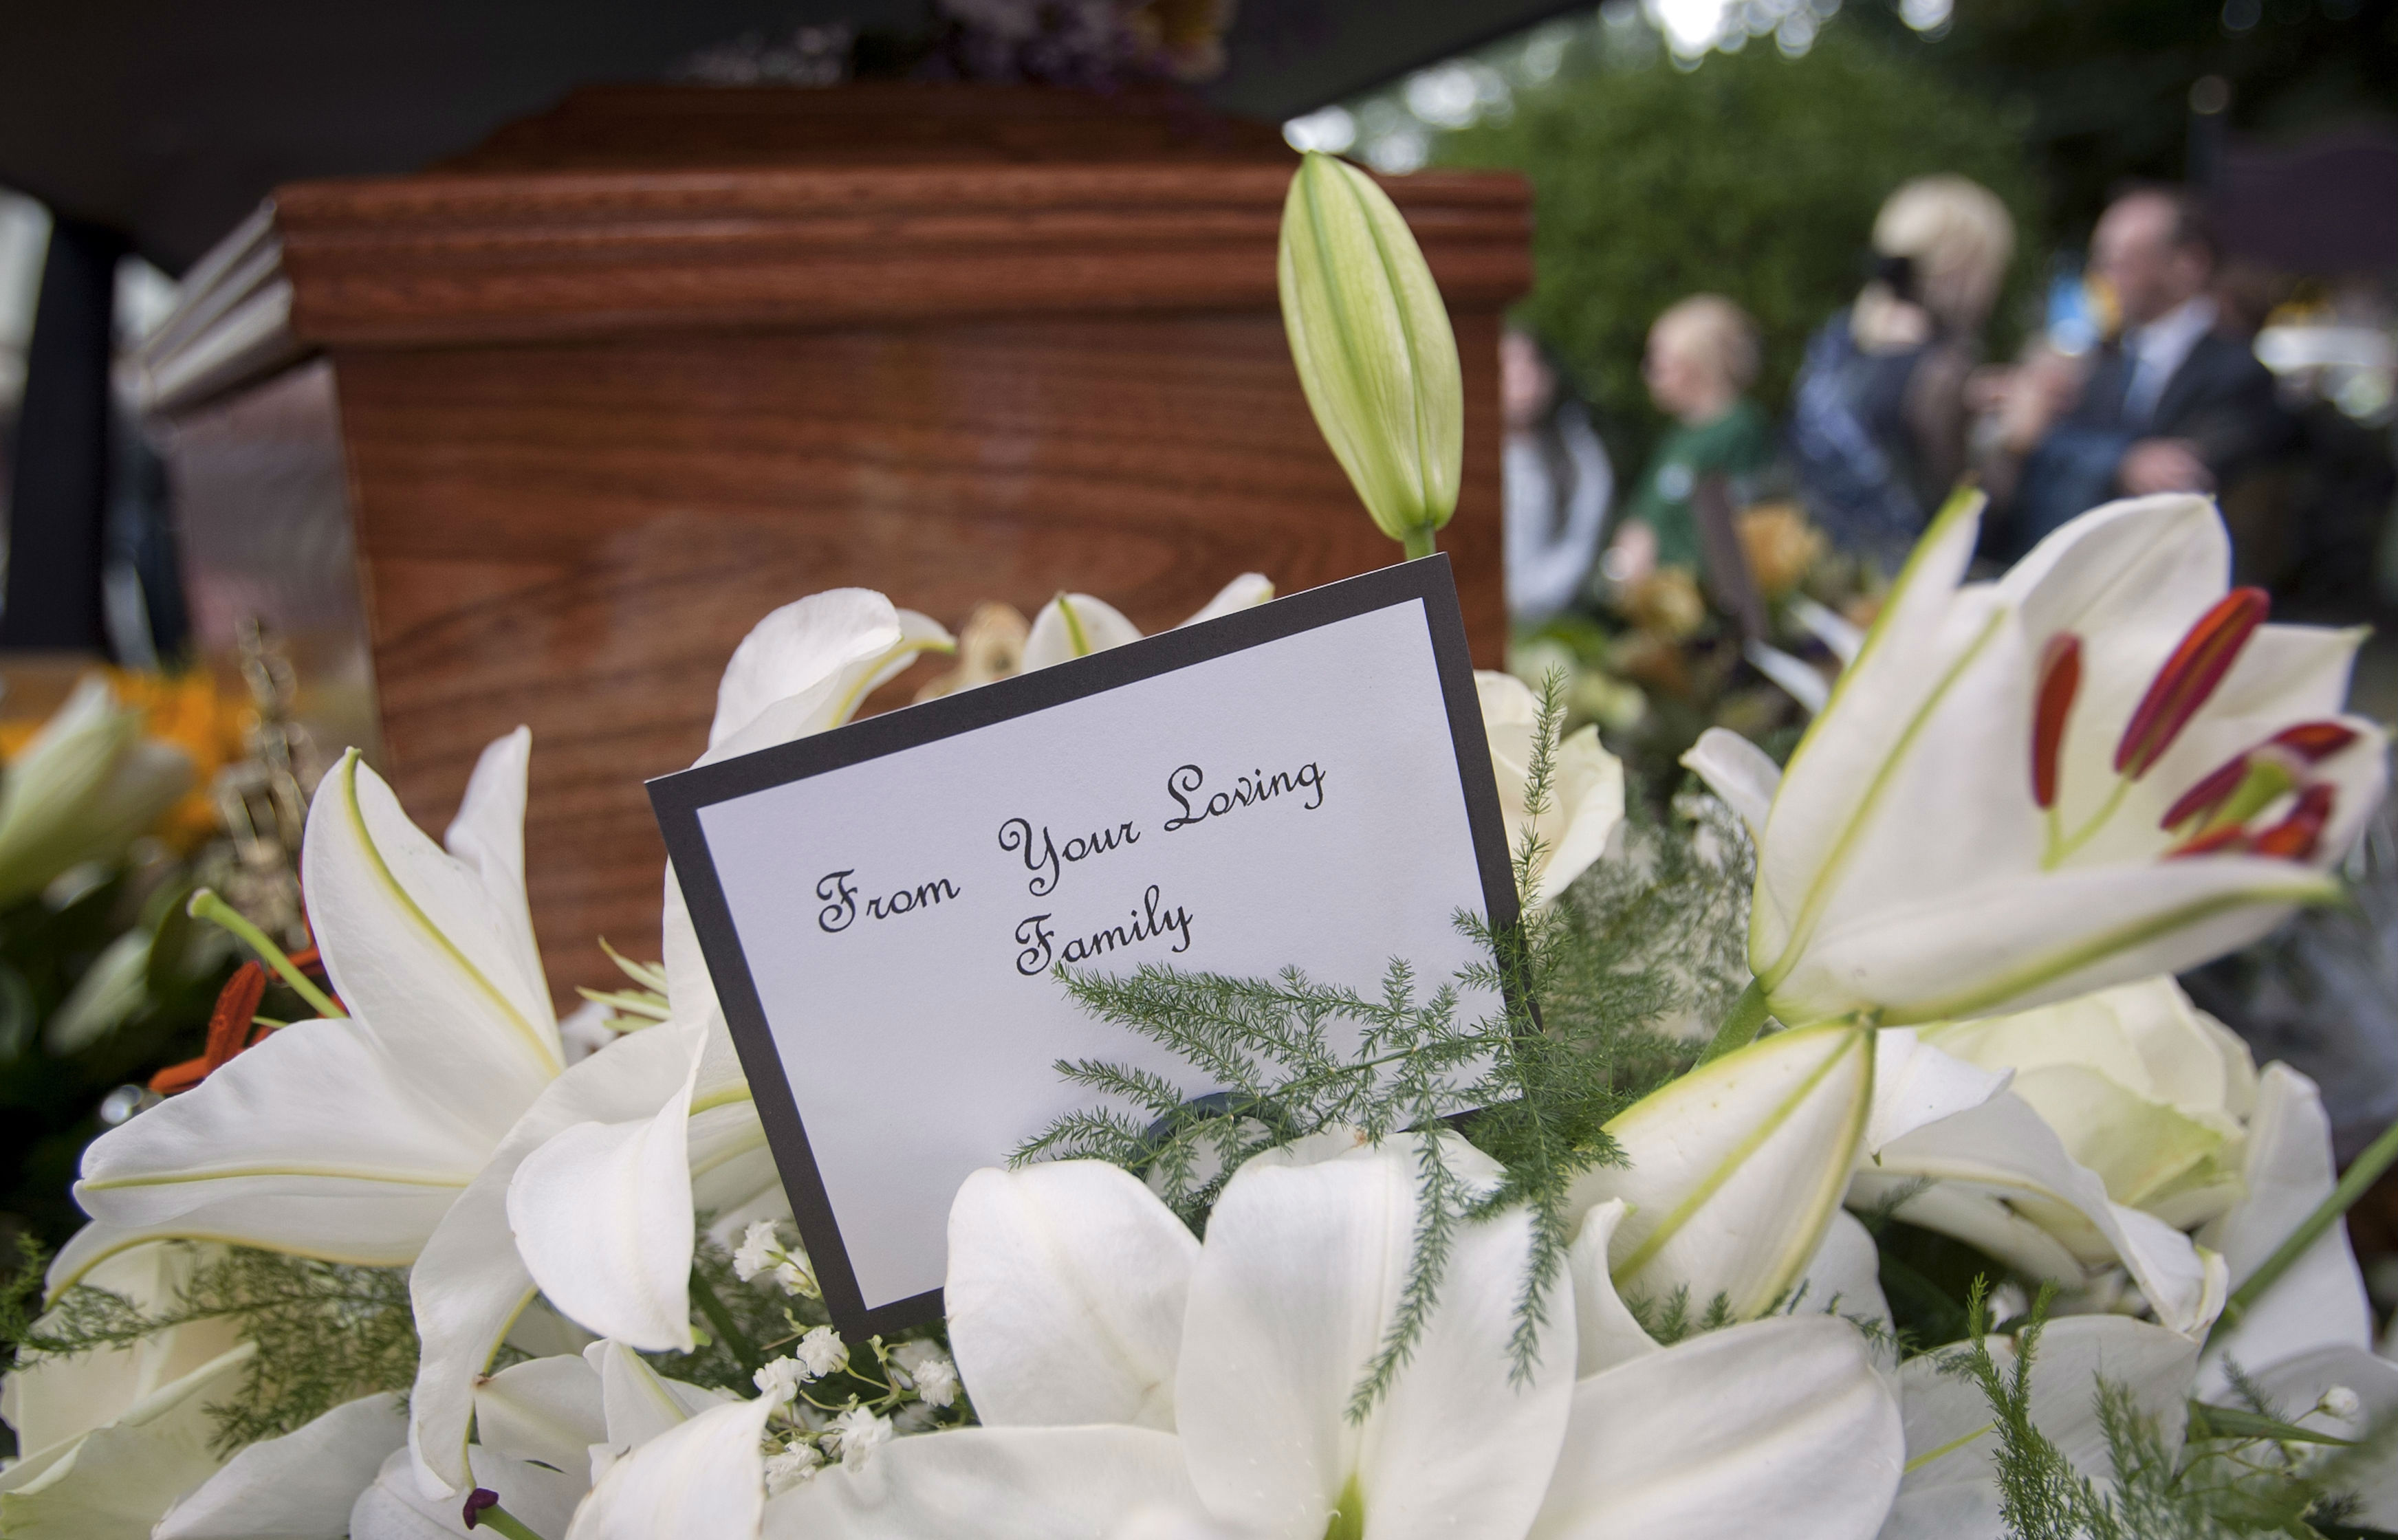 Funeral workers need more counselling and face greatest distress, says survey